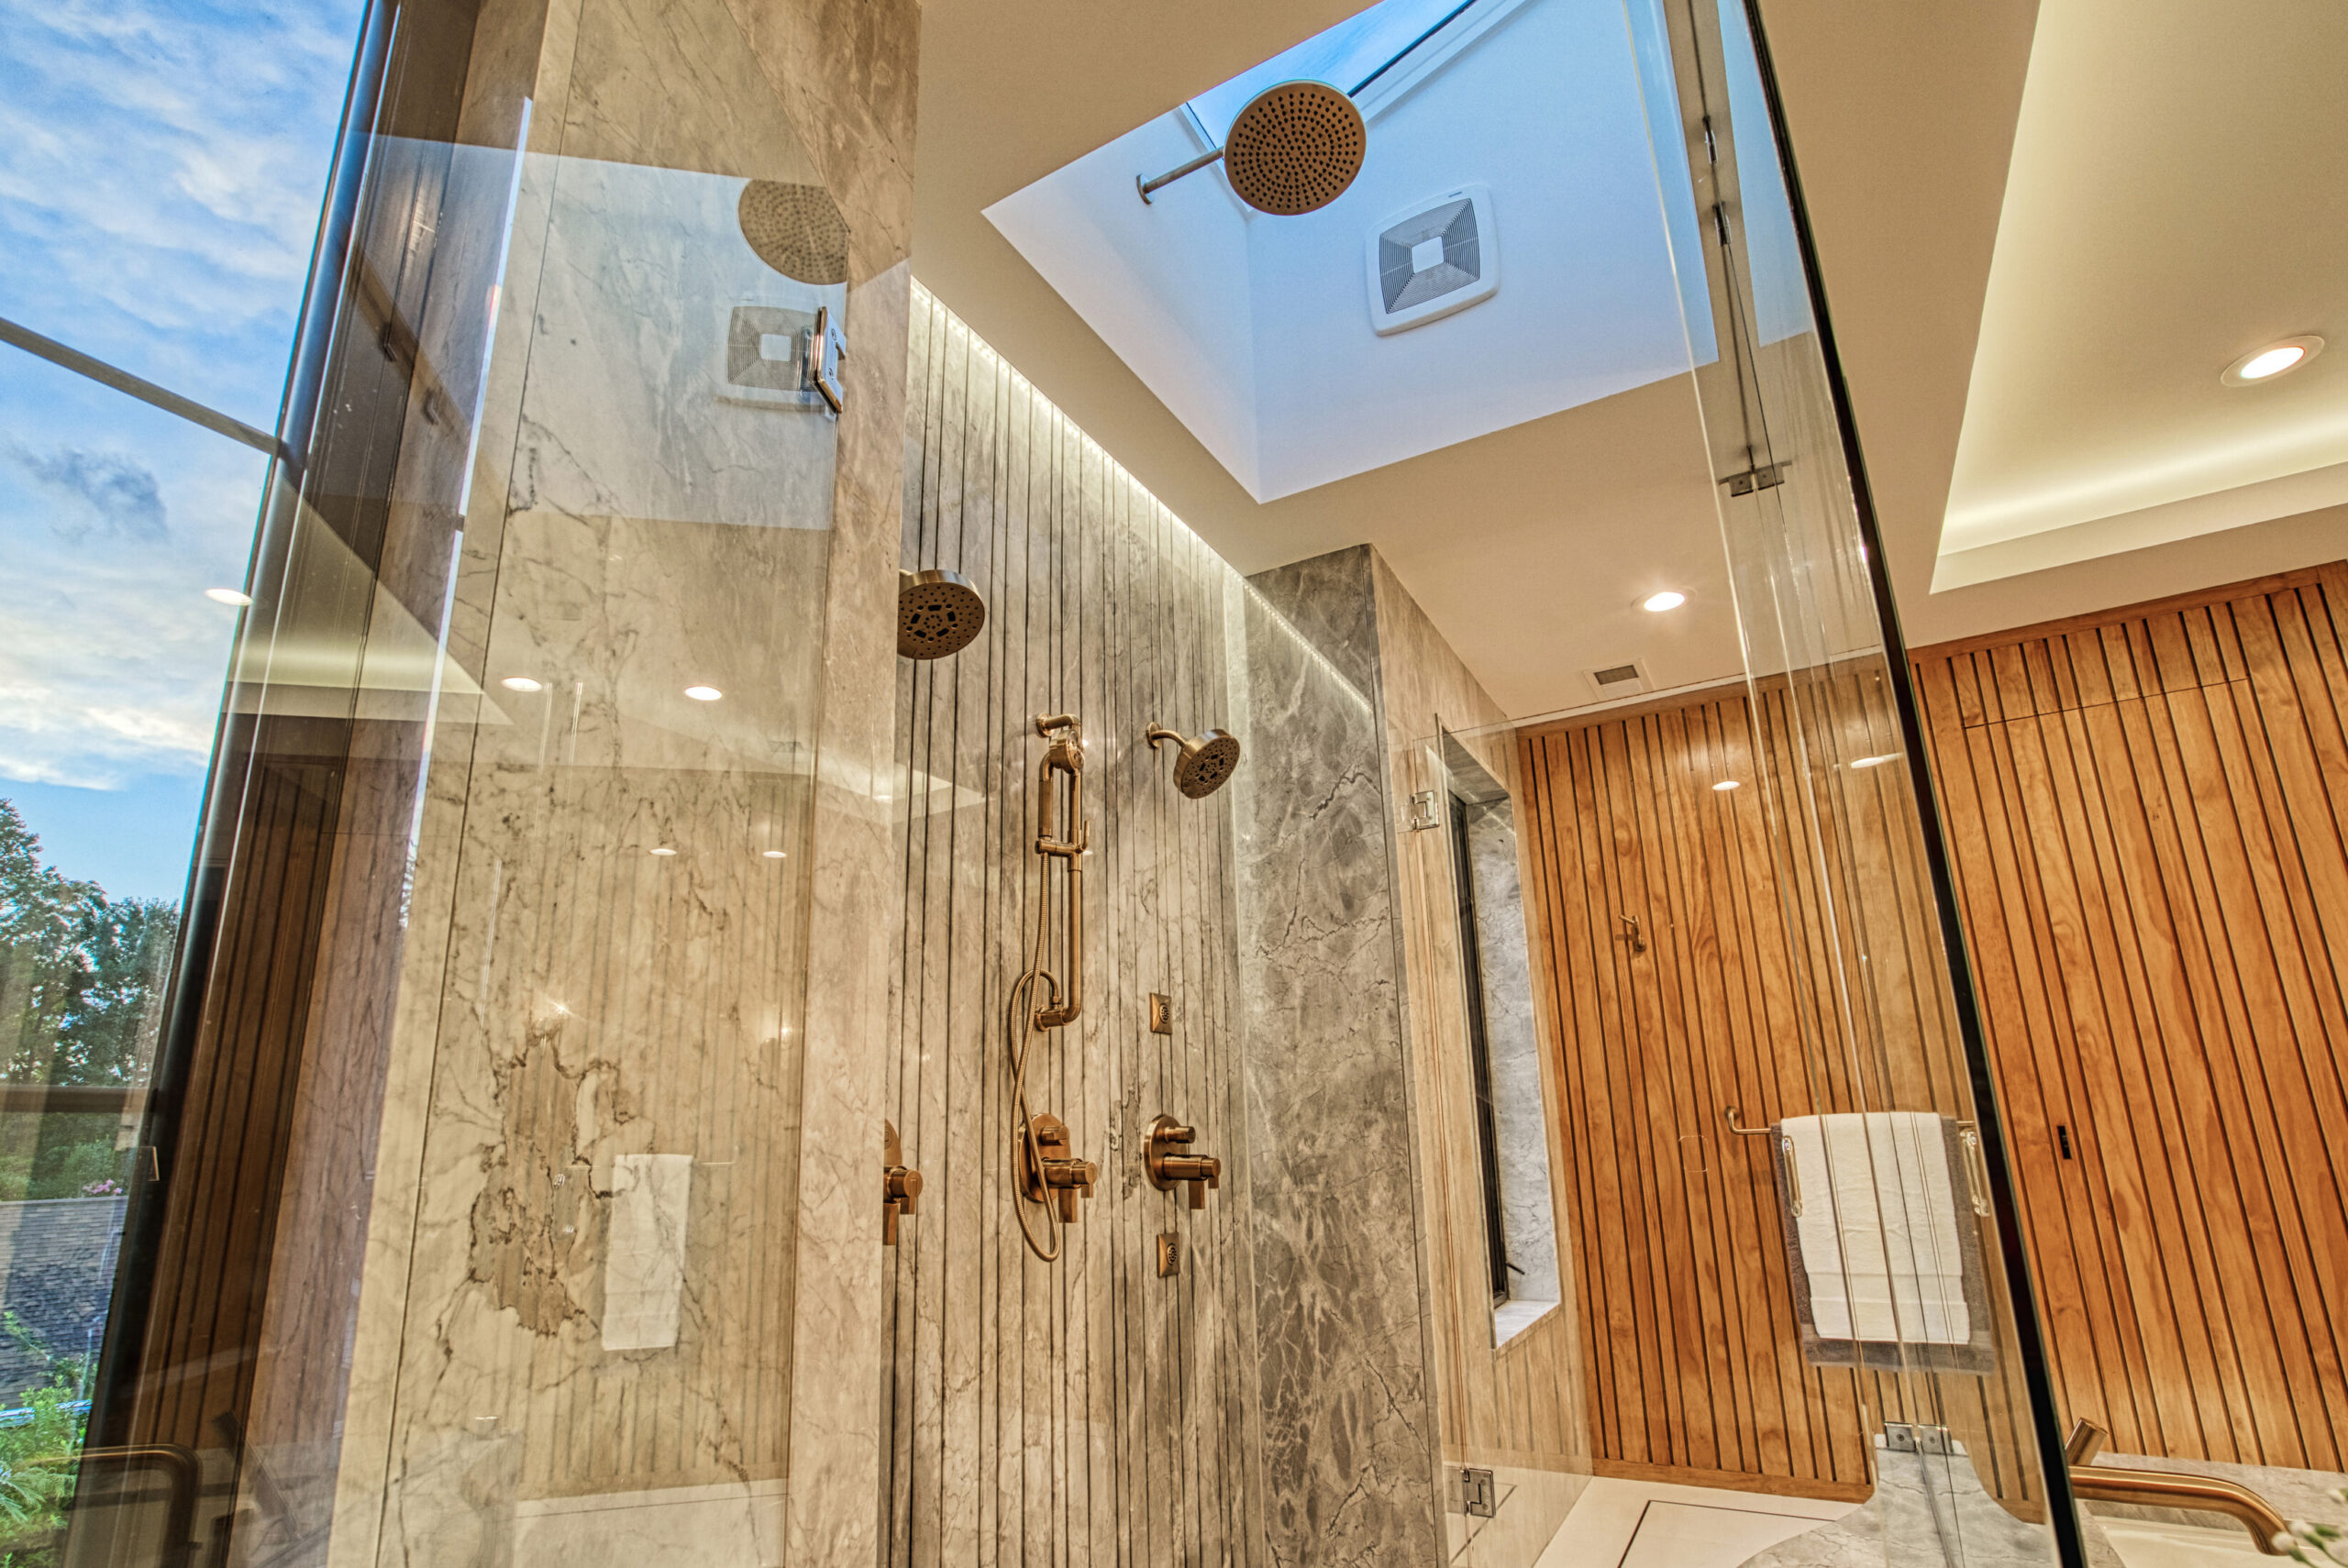 stunning marble, glass-enclosed shower with gold fixtures, rain head in recessed ceiling with skylight